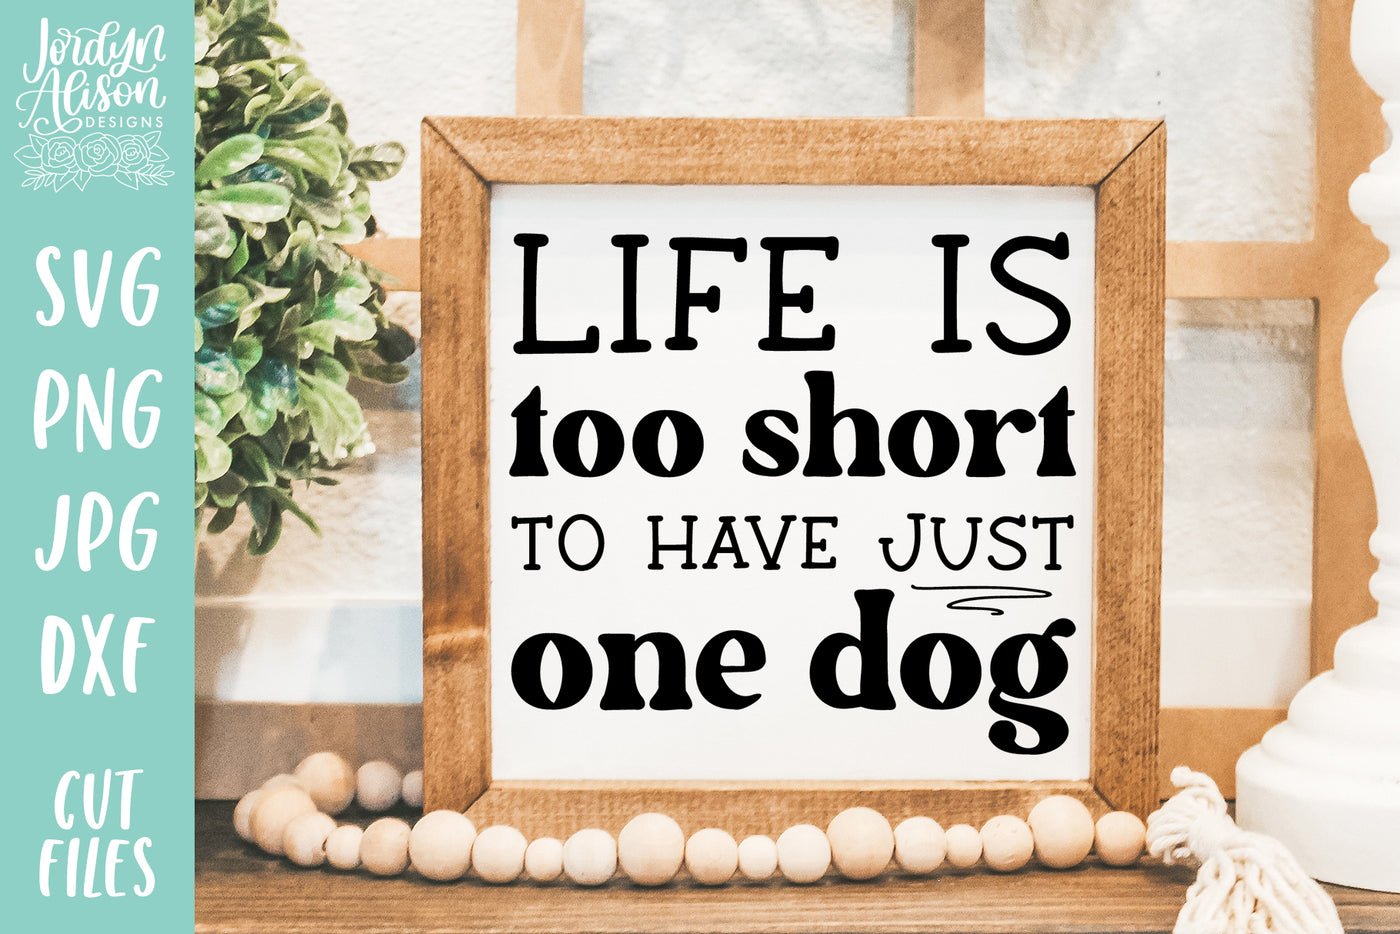 Too Short for One Dog SVG